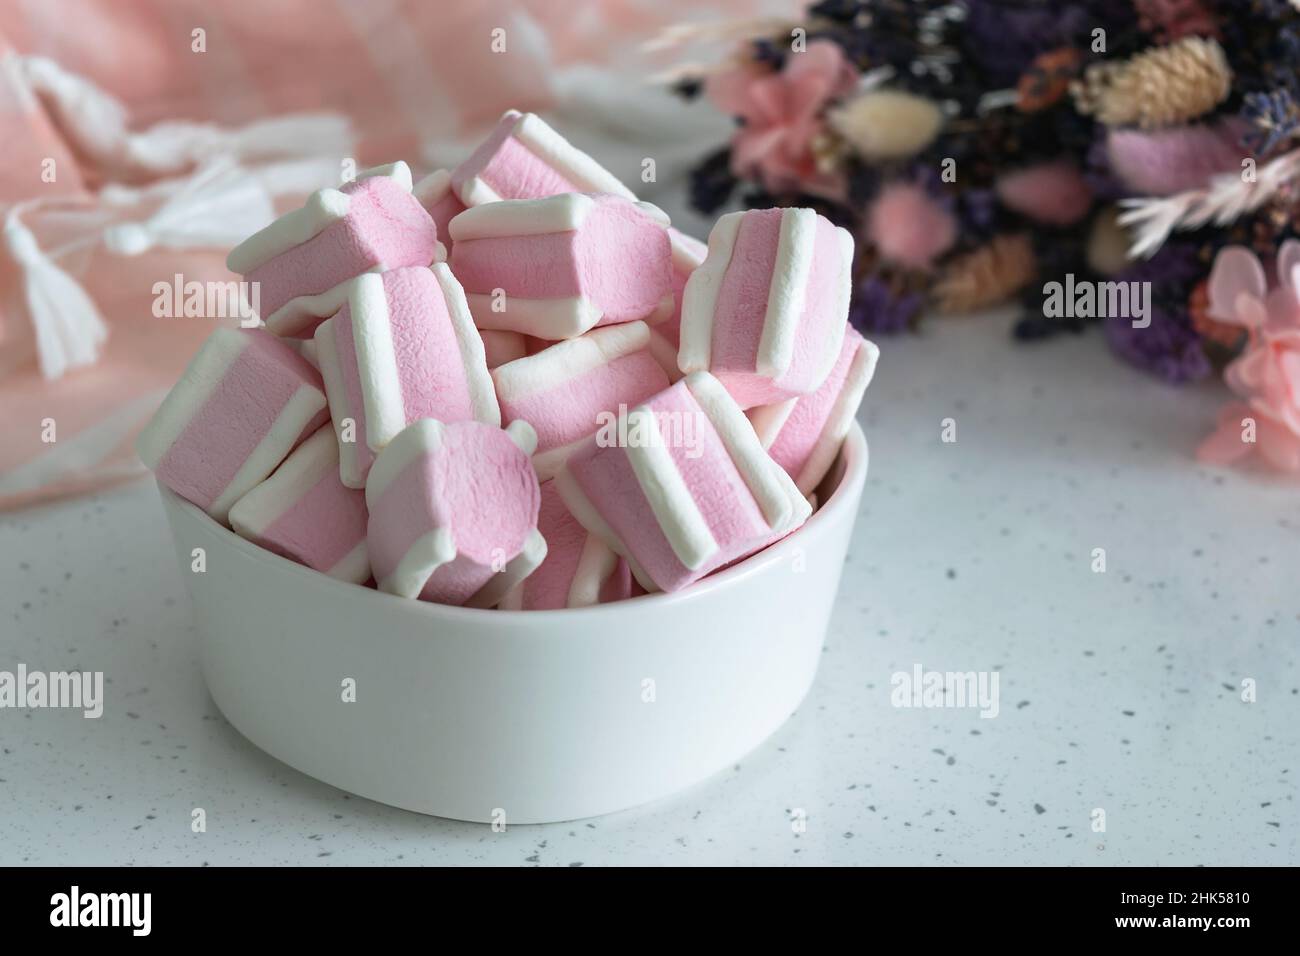 Marshmallow on a light table next to a bouquet of wild field dried flowers. Sweets for tea and coffee on a porcelain plate. Horizontal photo. Stock Photo